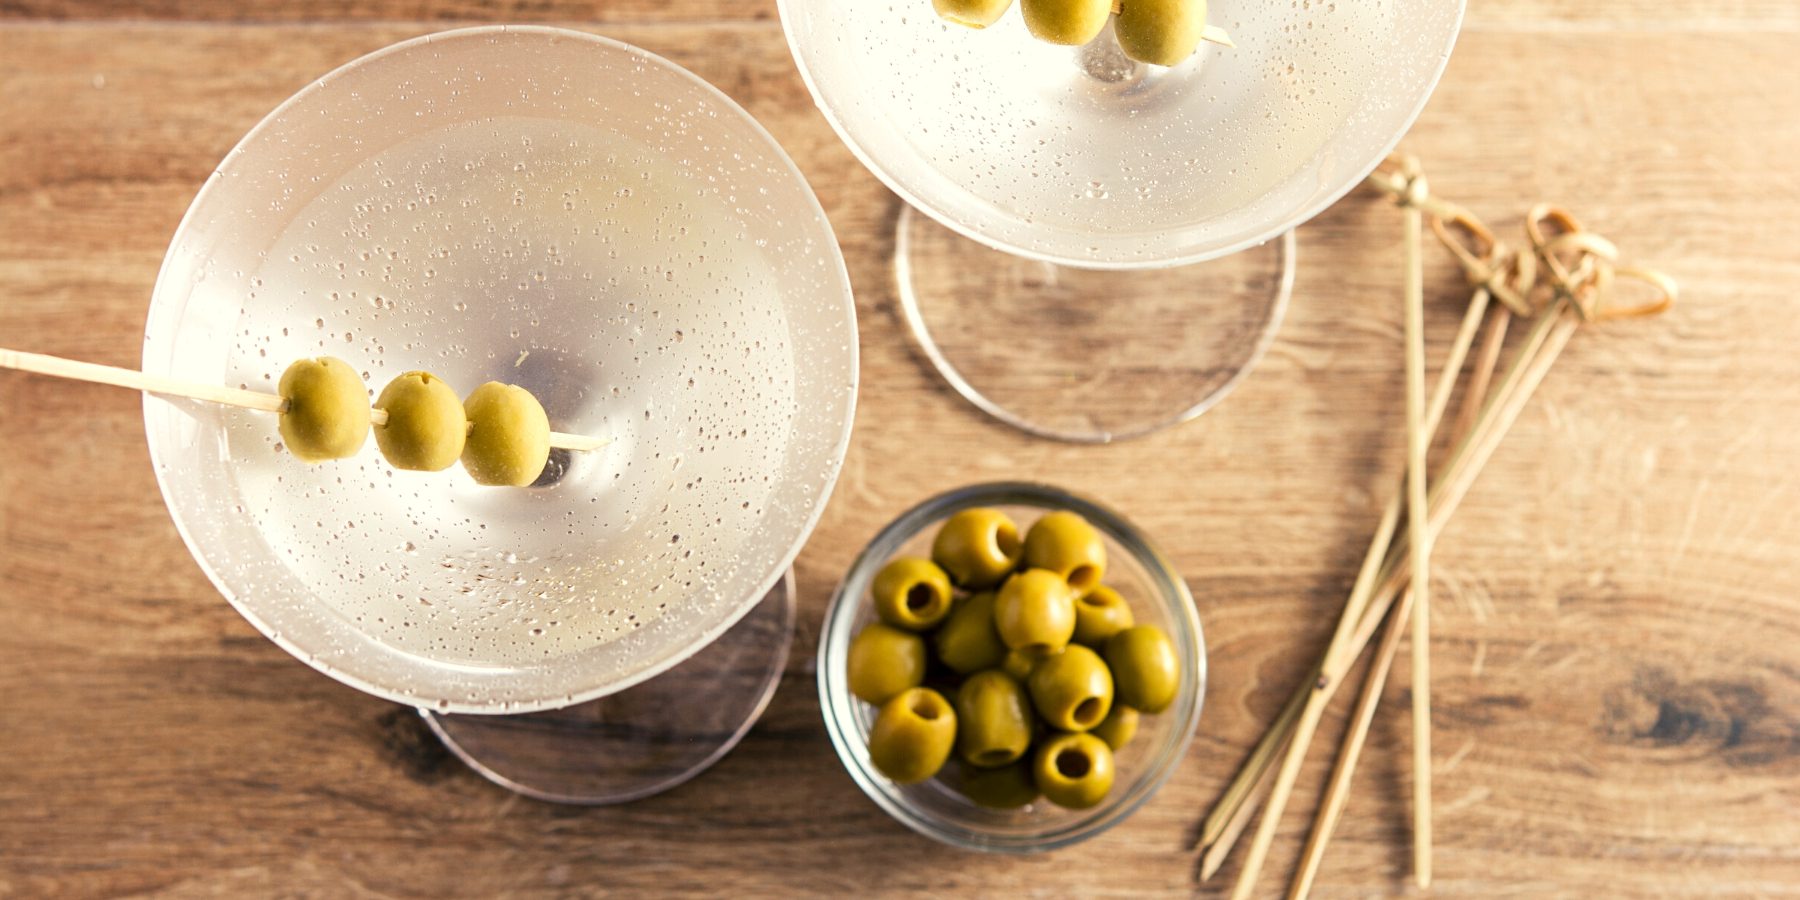 https://www.themixer.com/en-us/wp-content/uploads/sites/2/2022/04/14-Types-of-Martinis-You-Should-Know_Featured-Image_CANVA_-etorres69-1-e1674136223877.jpg